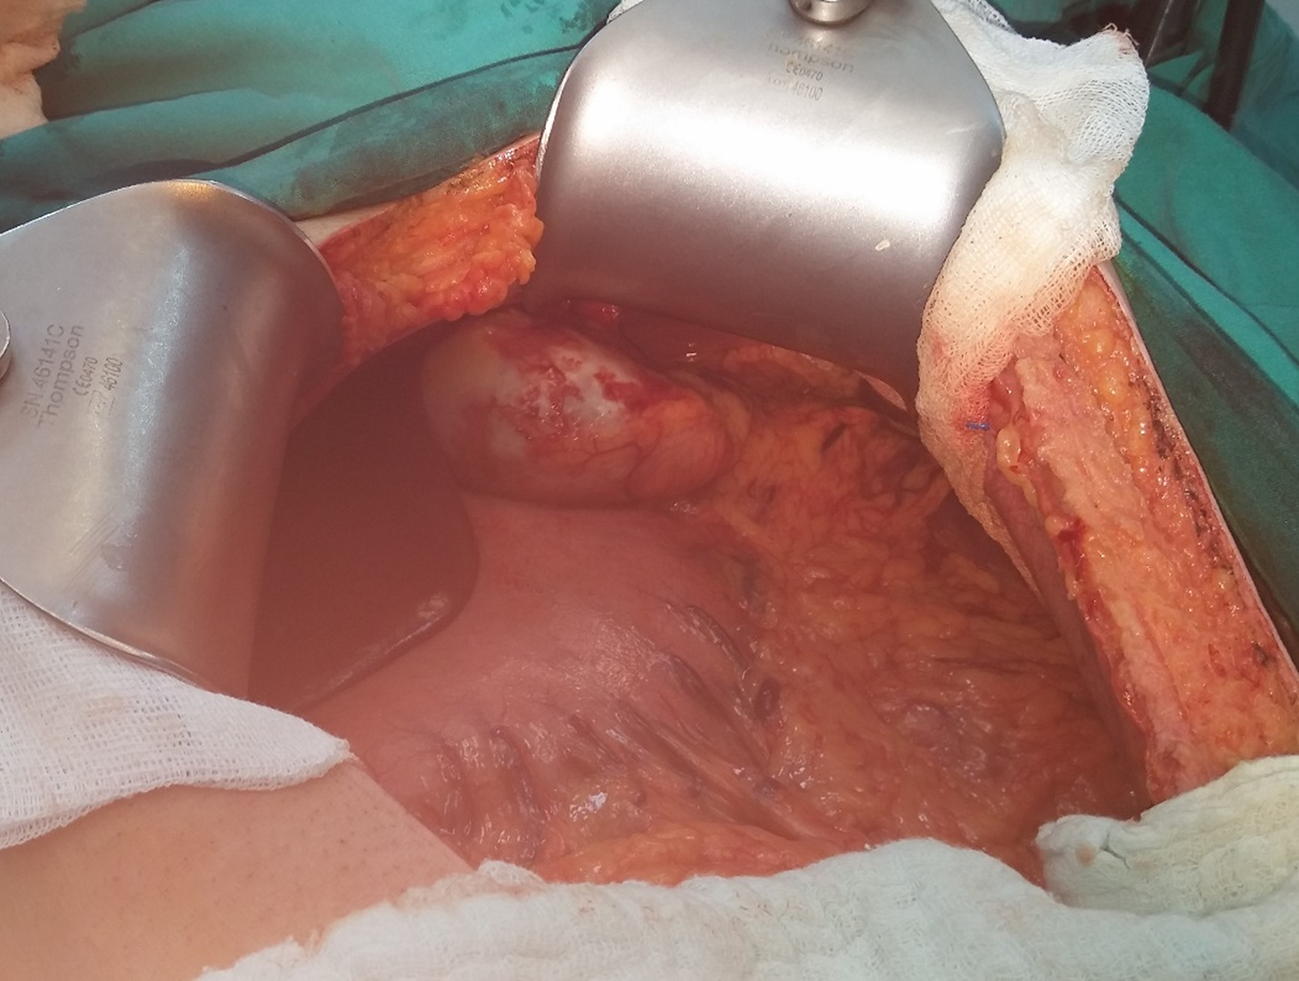 Intraperitoneal rupture of the hydatid cyst: Four case reports and